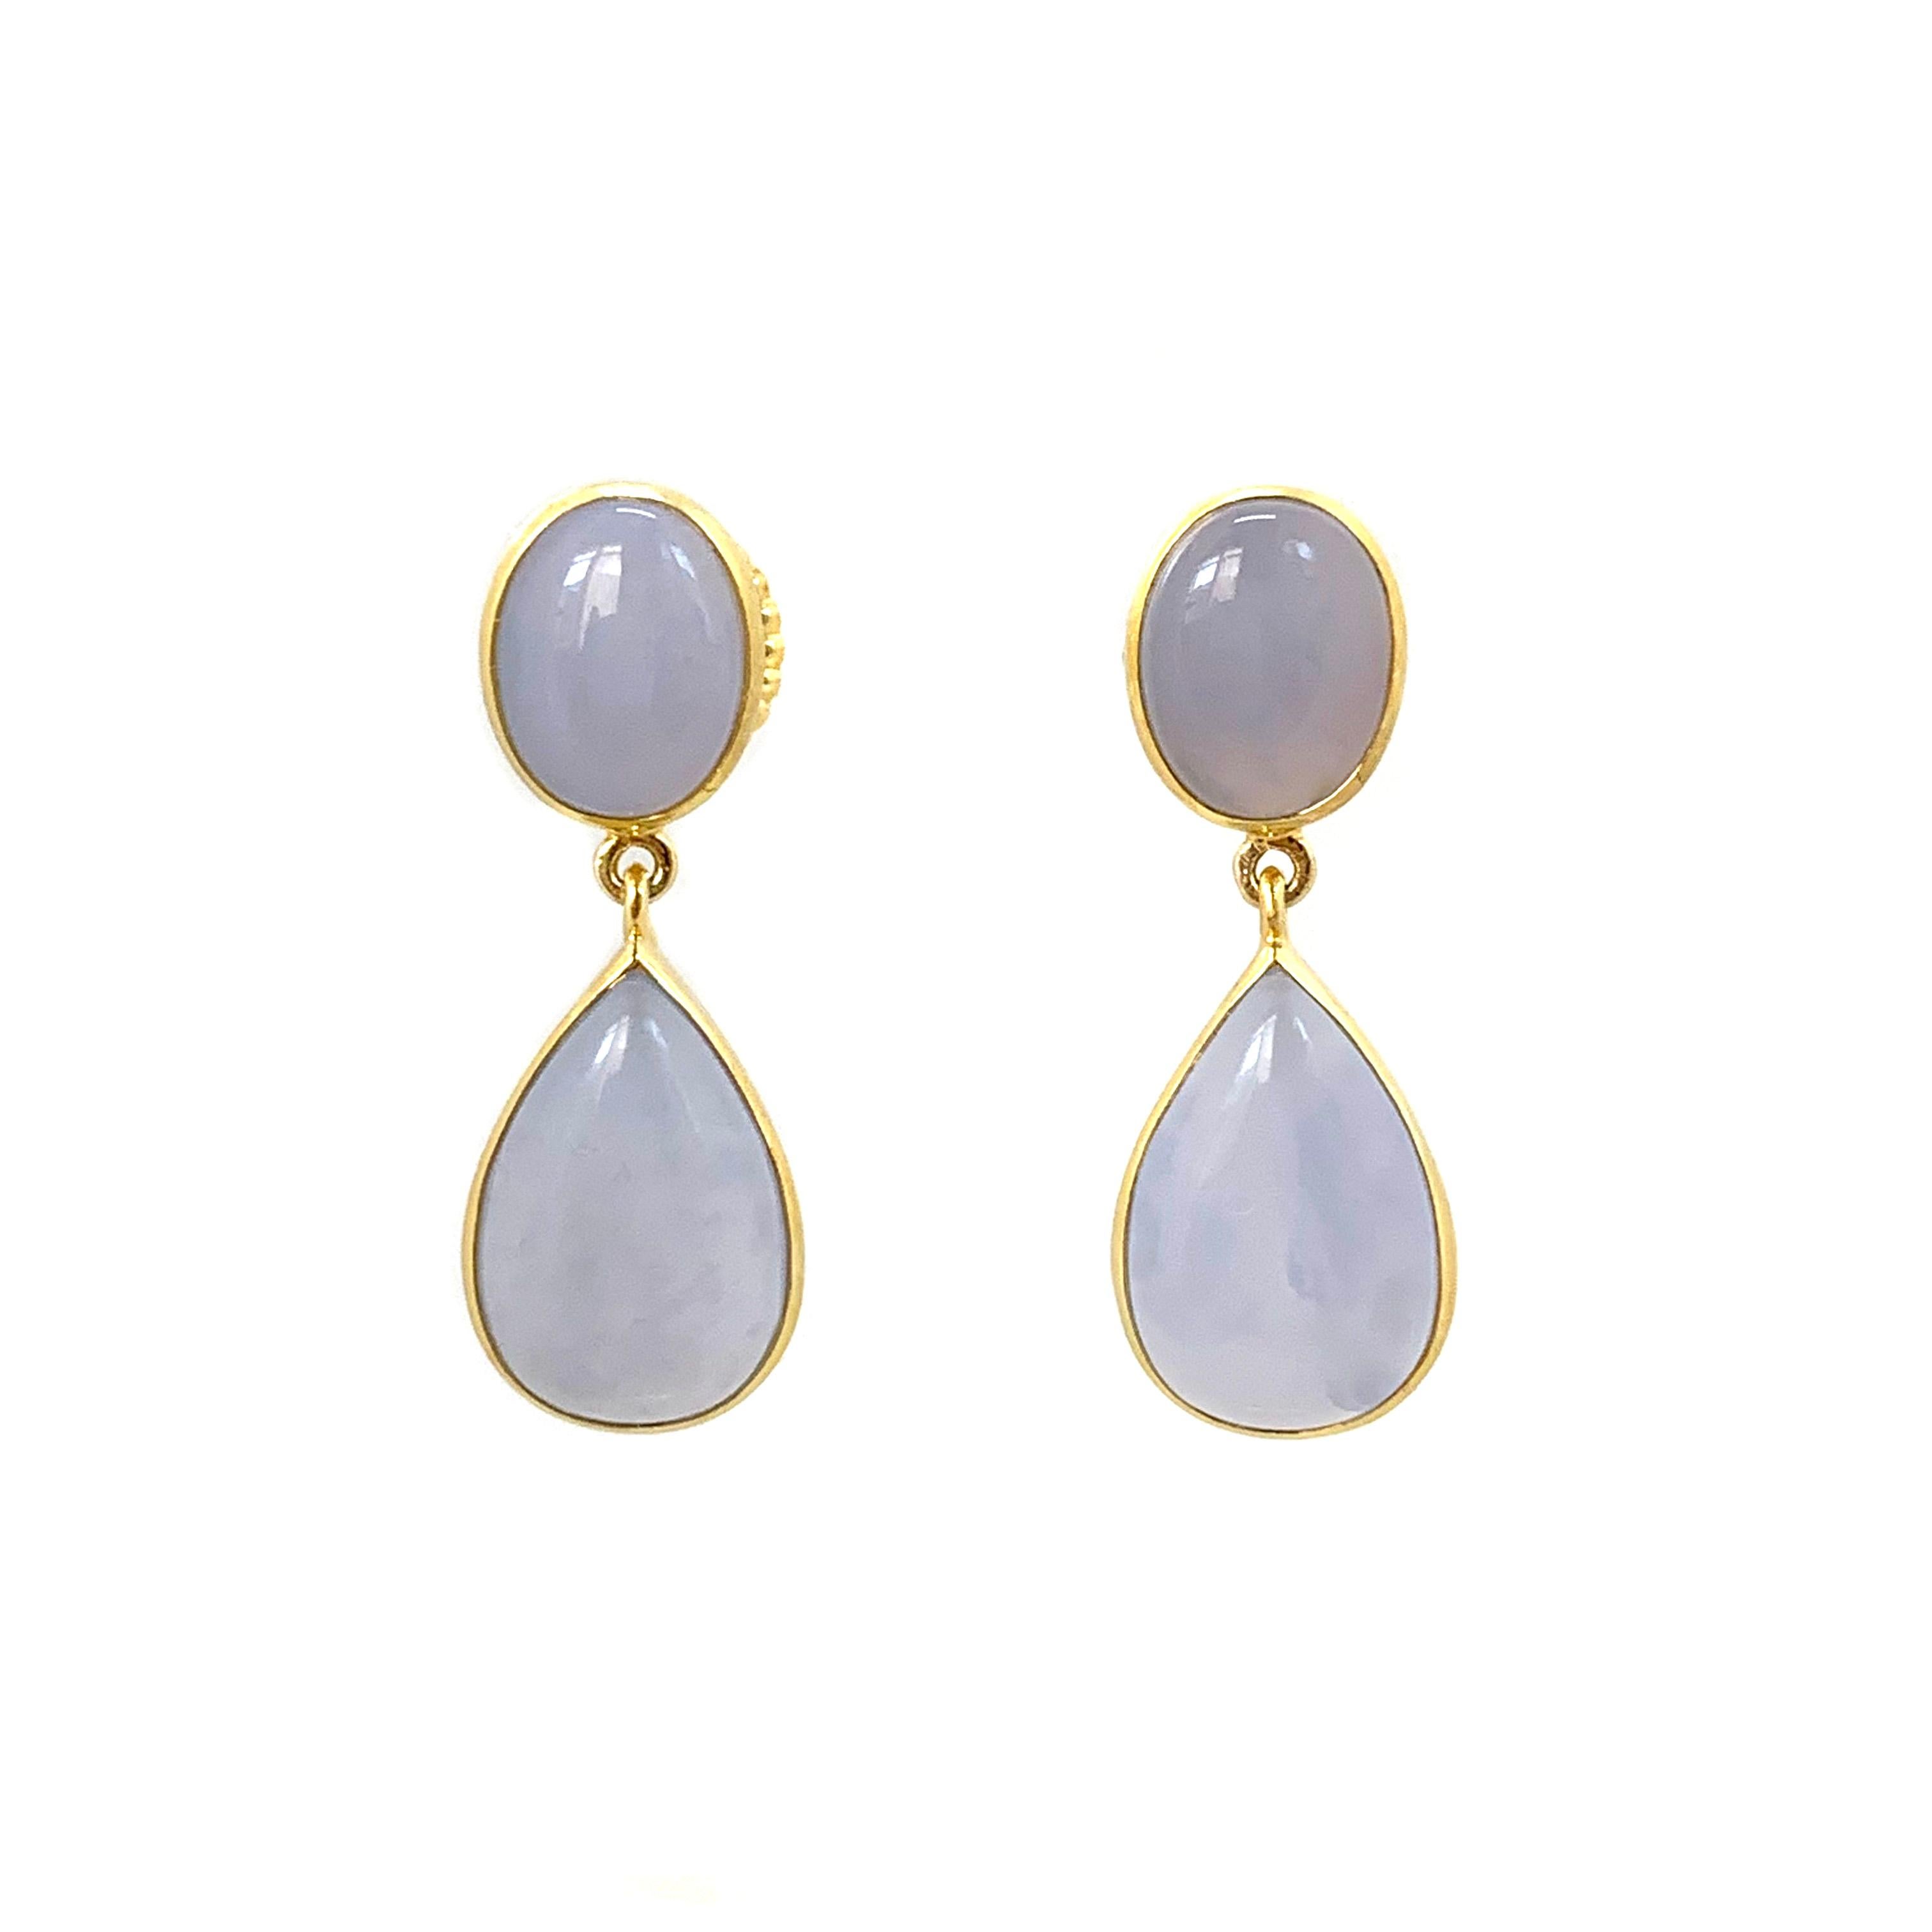 Bijoux Num Oval & Pear Shape Chalcedony Vermeil Drop Earrings

Discover these beautiful drop earrings featuring oval and pear shape periwinkly blue Chalcedony  - all in Cabochon cut - hand bezel set in 18k gold vermeil over sterling silver with